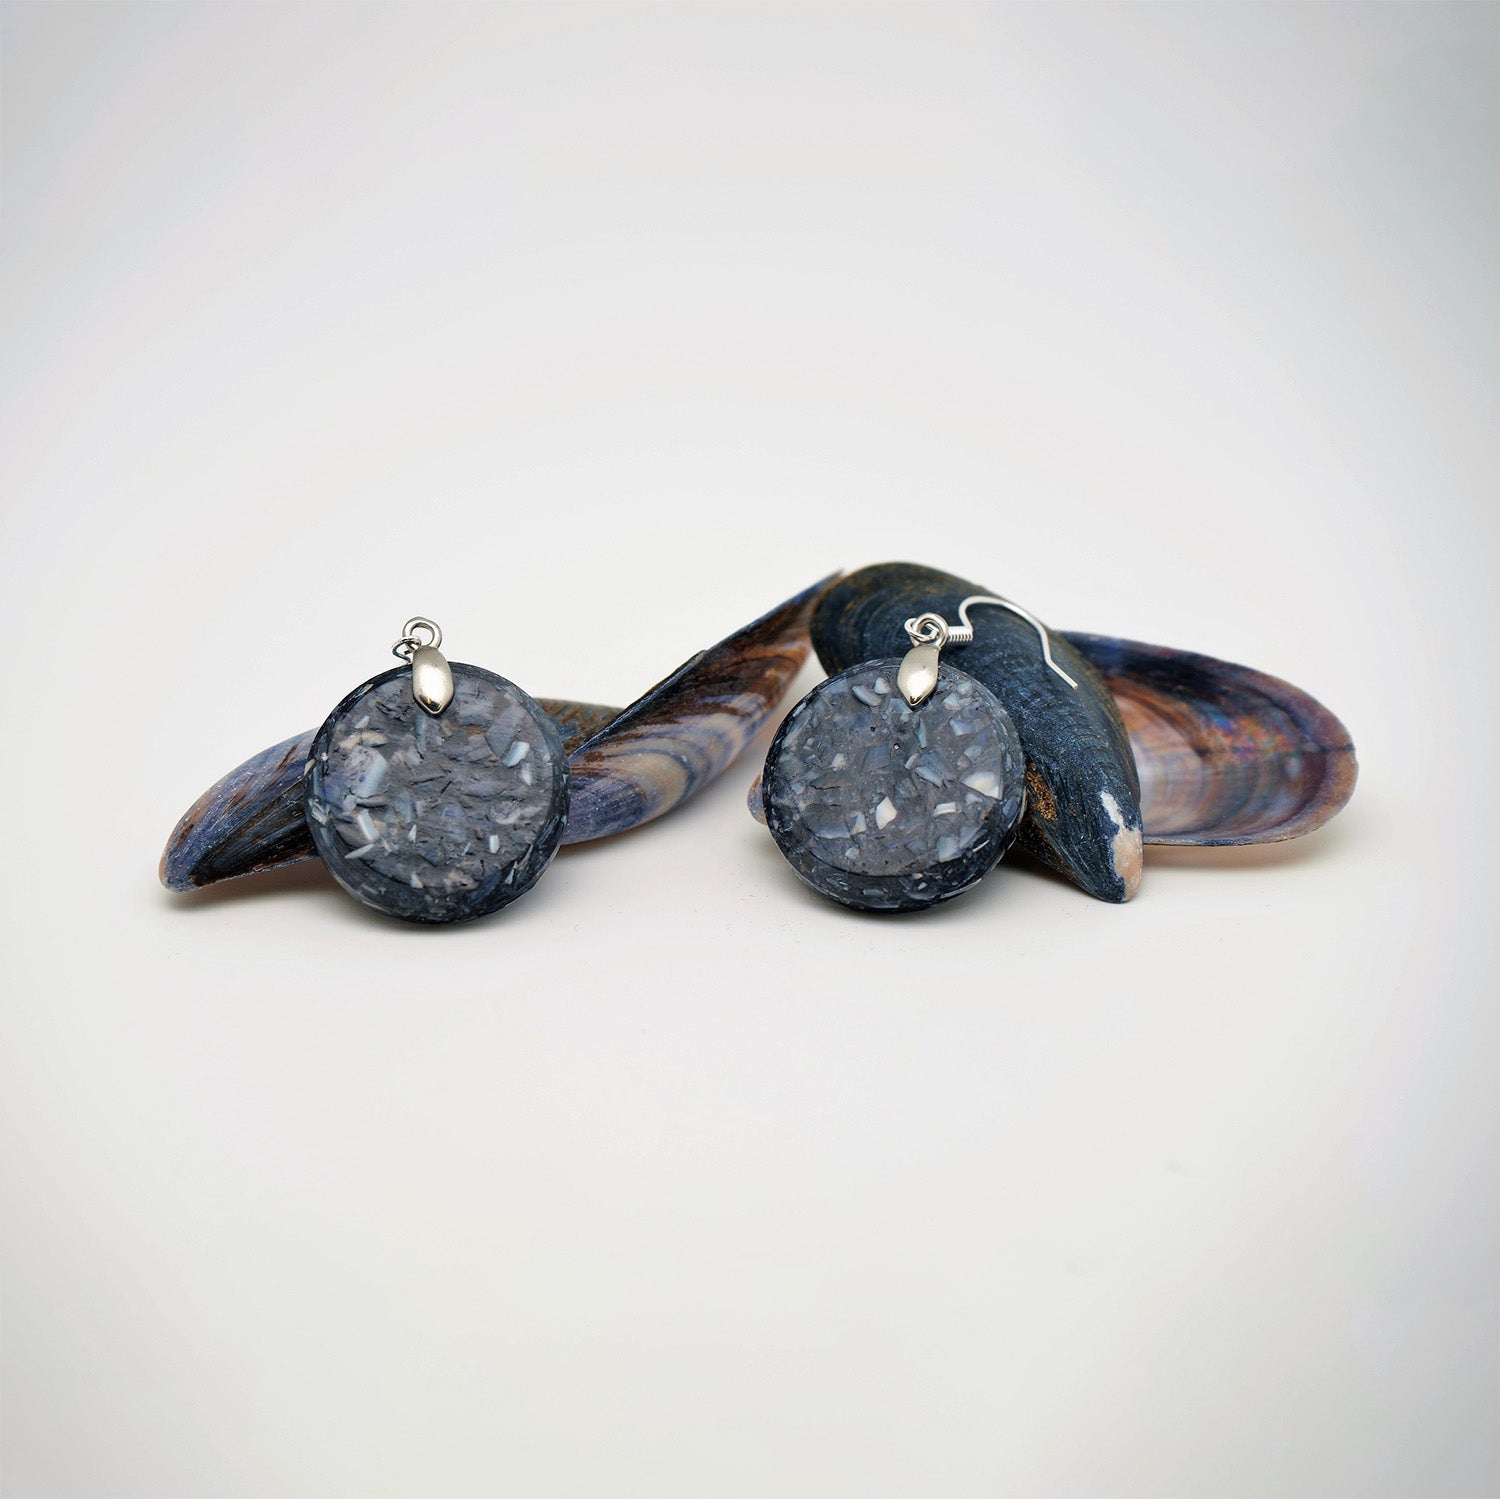 Round earrings made from recycled mussel shells